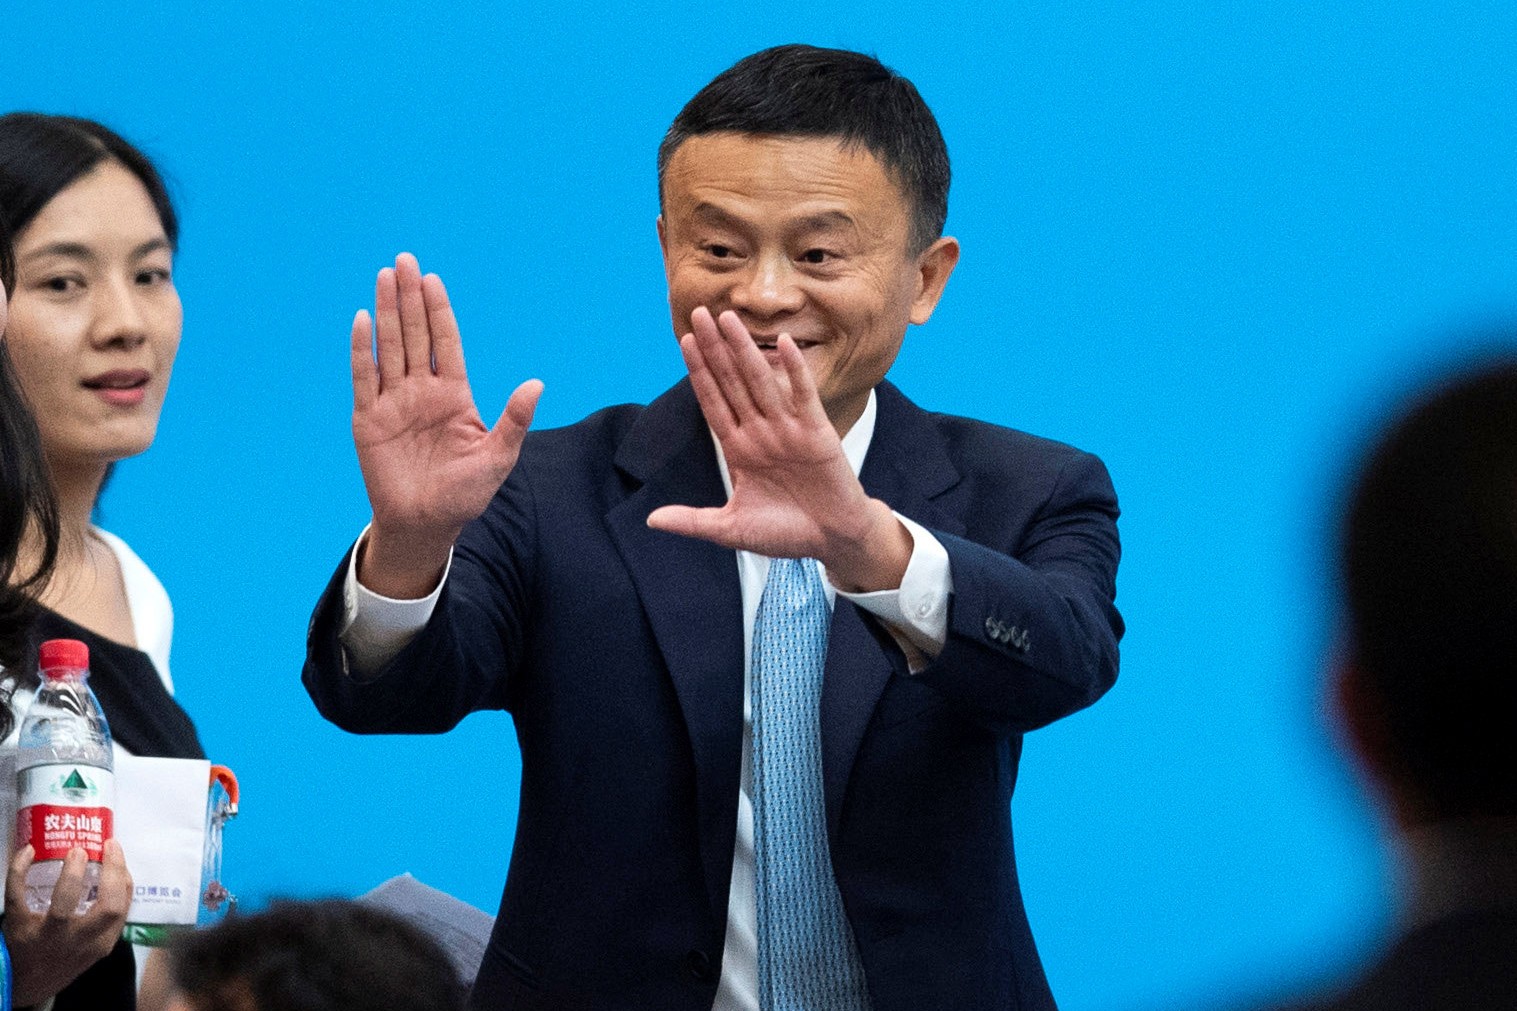 Jack Ma, Alibaba founder, arrives for a forum of the first China International Import Expo (CIIE) in Shanghai on November 5, 2018. Photo: Reuters